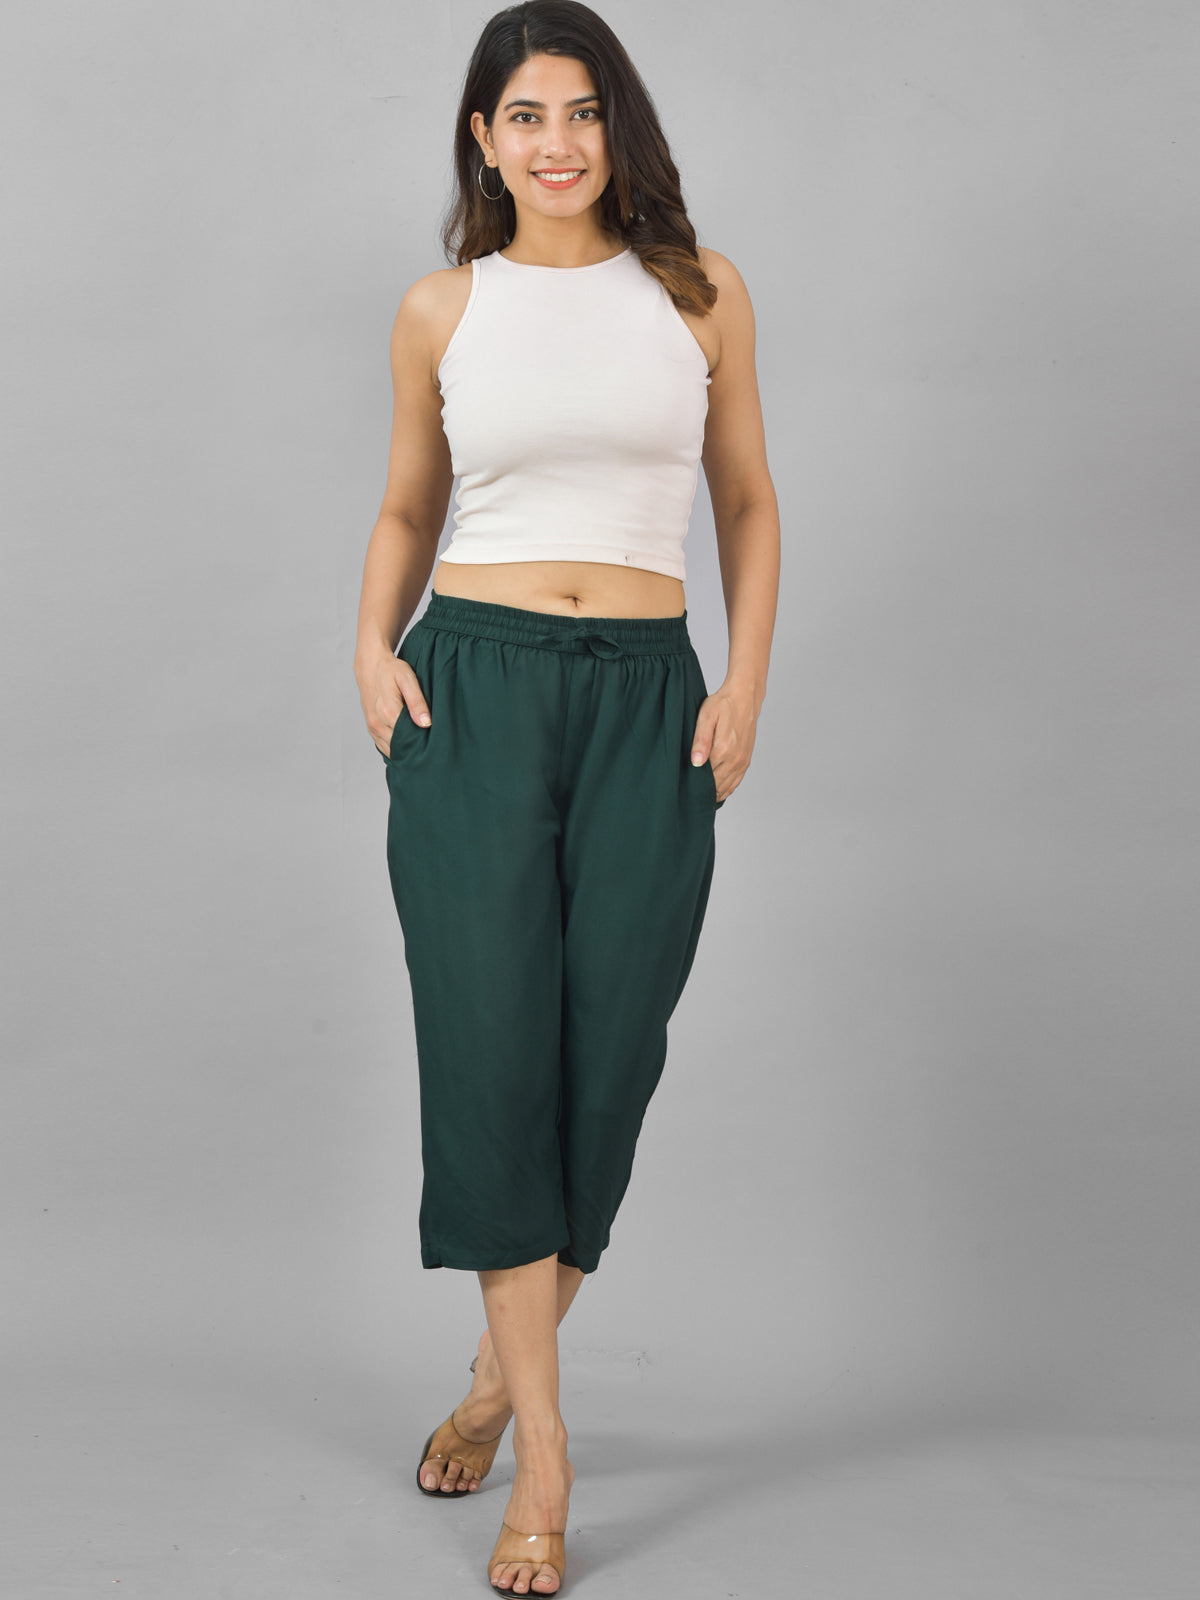 Pack Of 2 Womens Dark Green And White Calf Length Rayon Culottes Trouser Combo